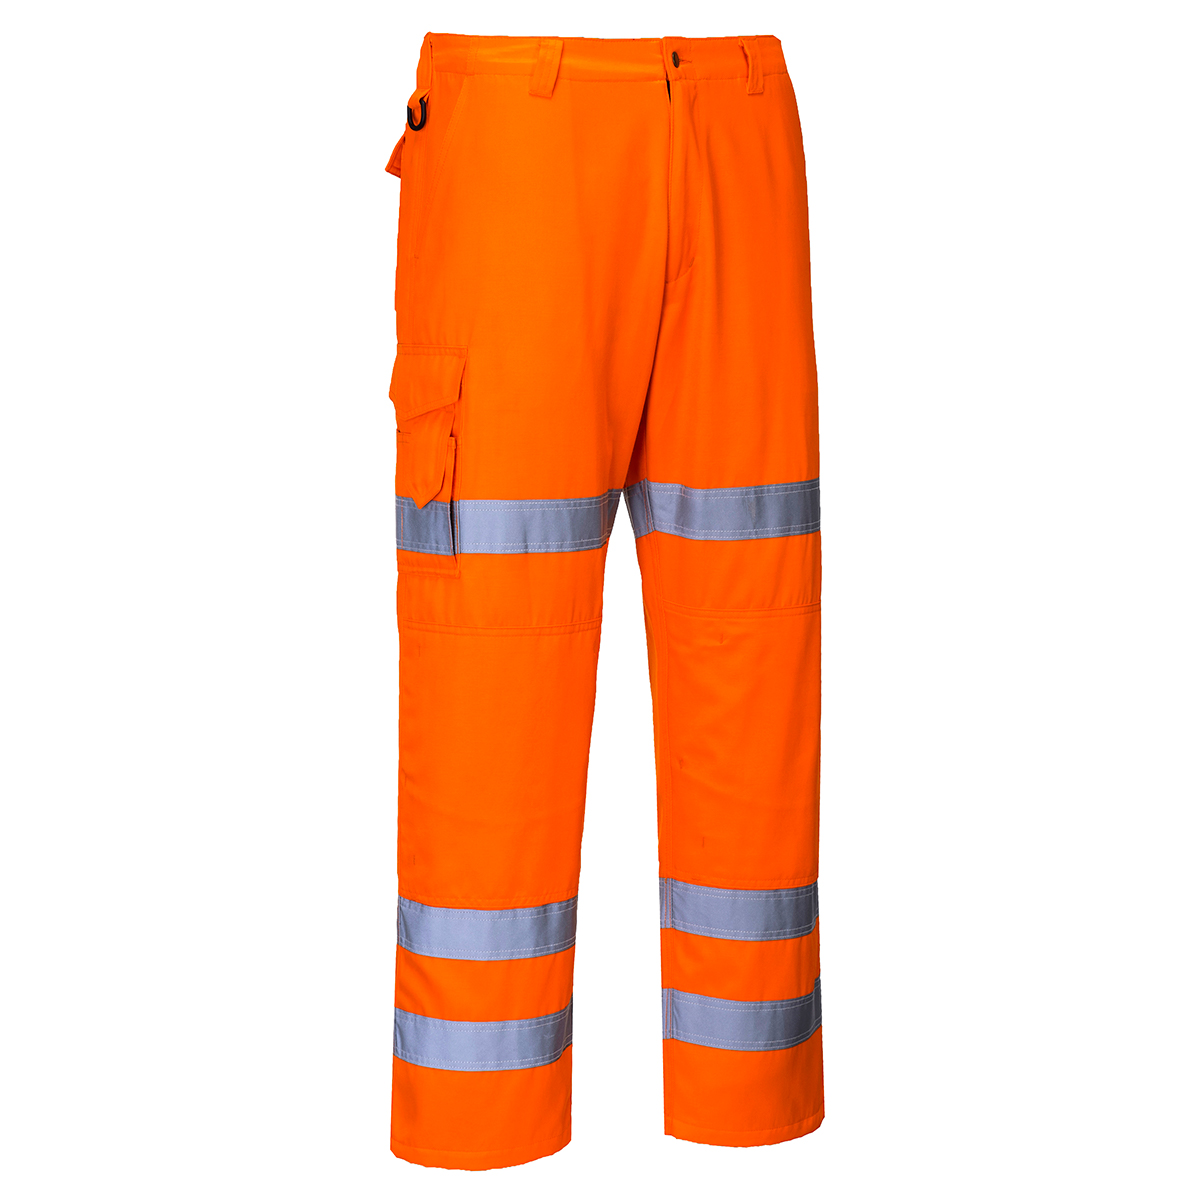 MASCOT SAFE SUPREME Kendal Yellow Hi-Vis Trousers with Kneepad Pockets |  MASCOT | Work Trousers | Arco